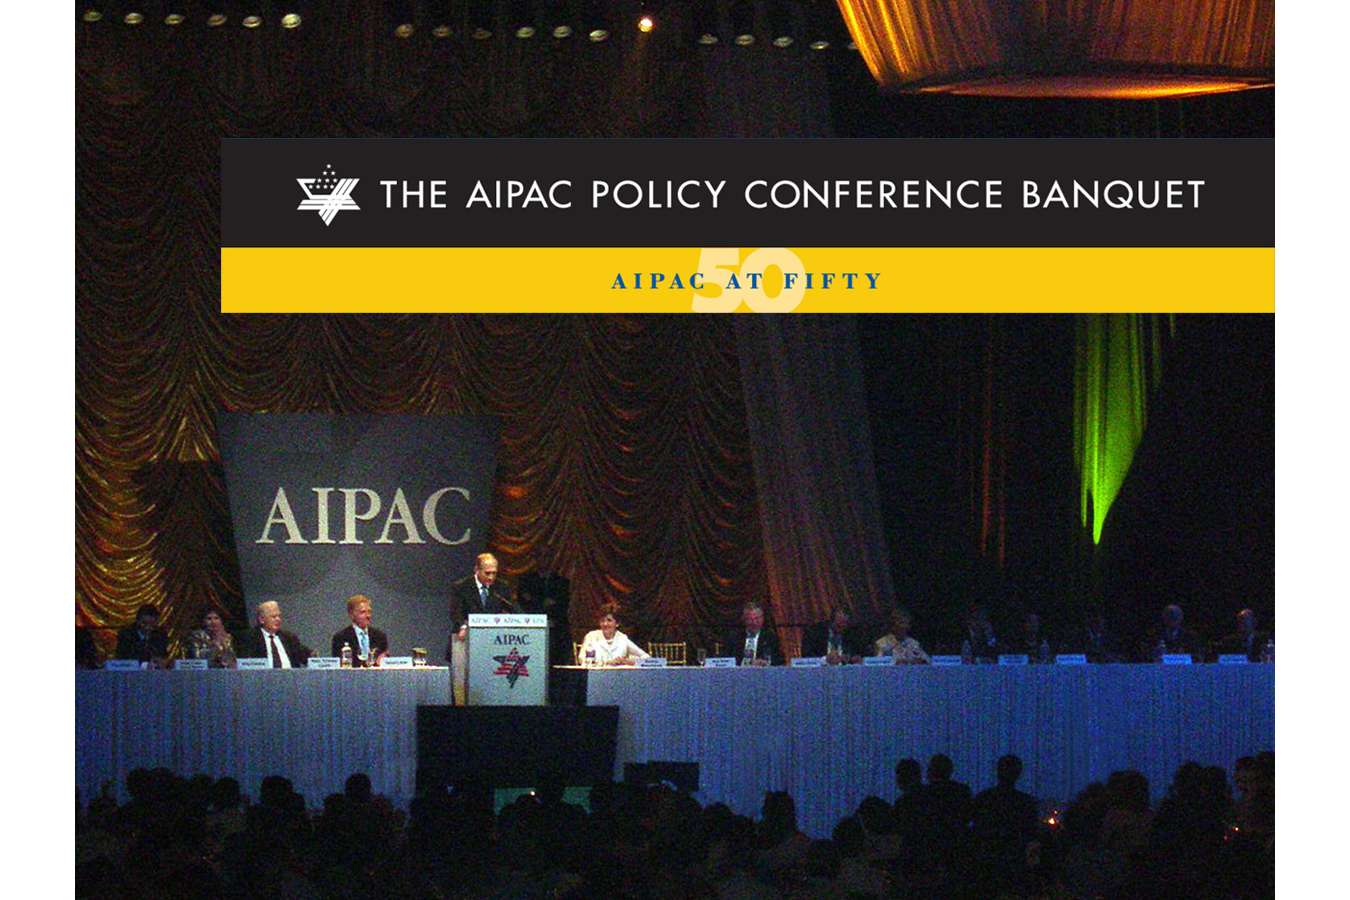 AIP 02 stage : Where else can you have world leaders speak to 5,000 people over a kosher dinner?